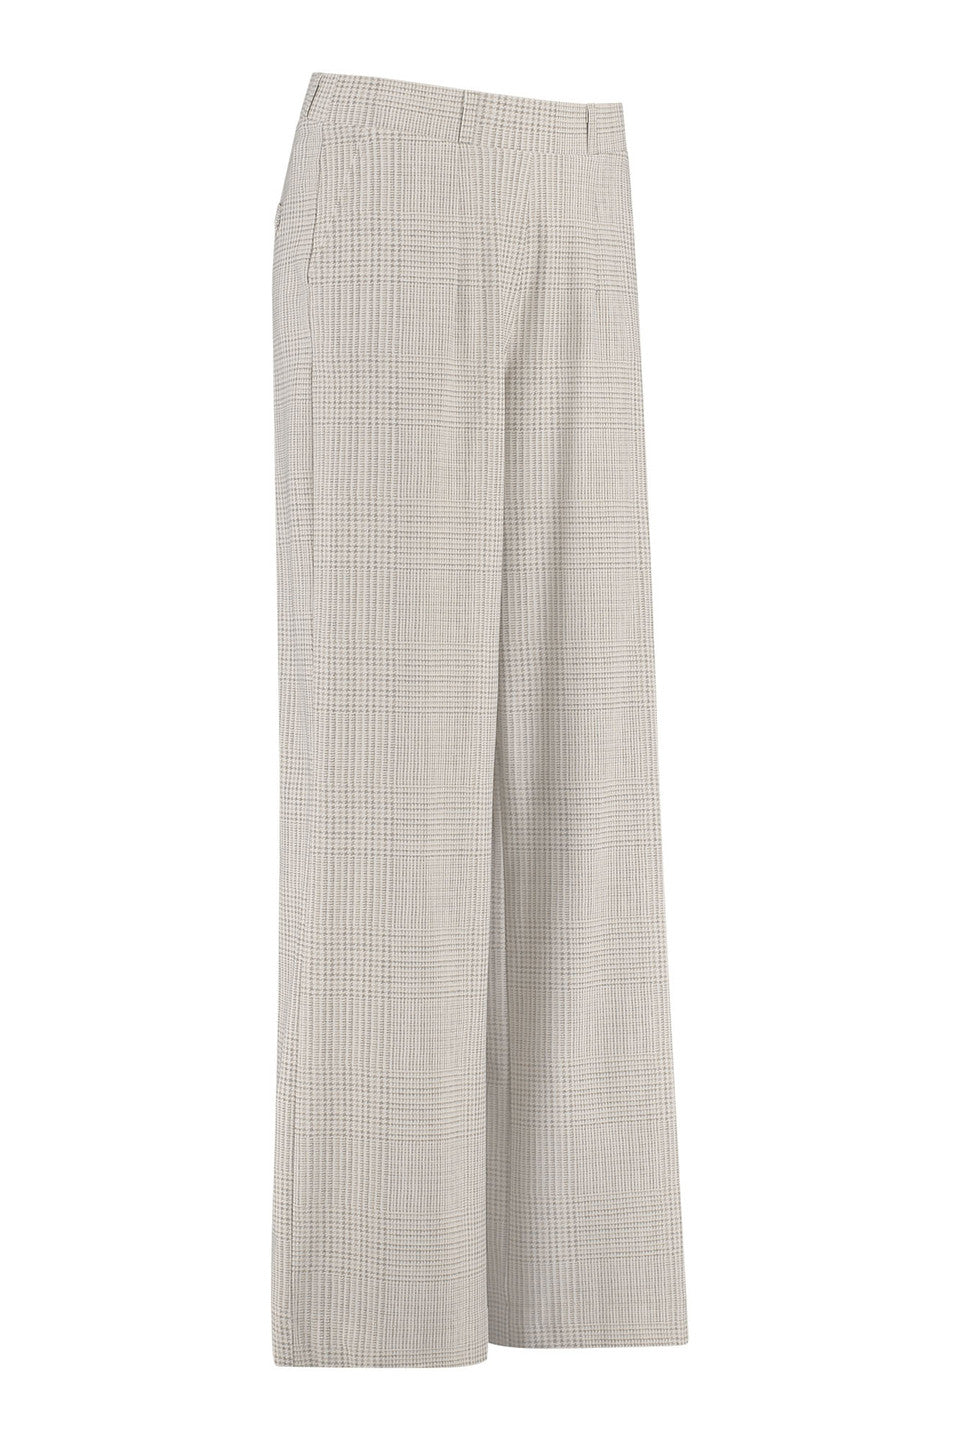 Studio Anneloes Sola check trousers